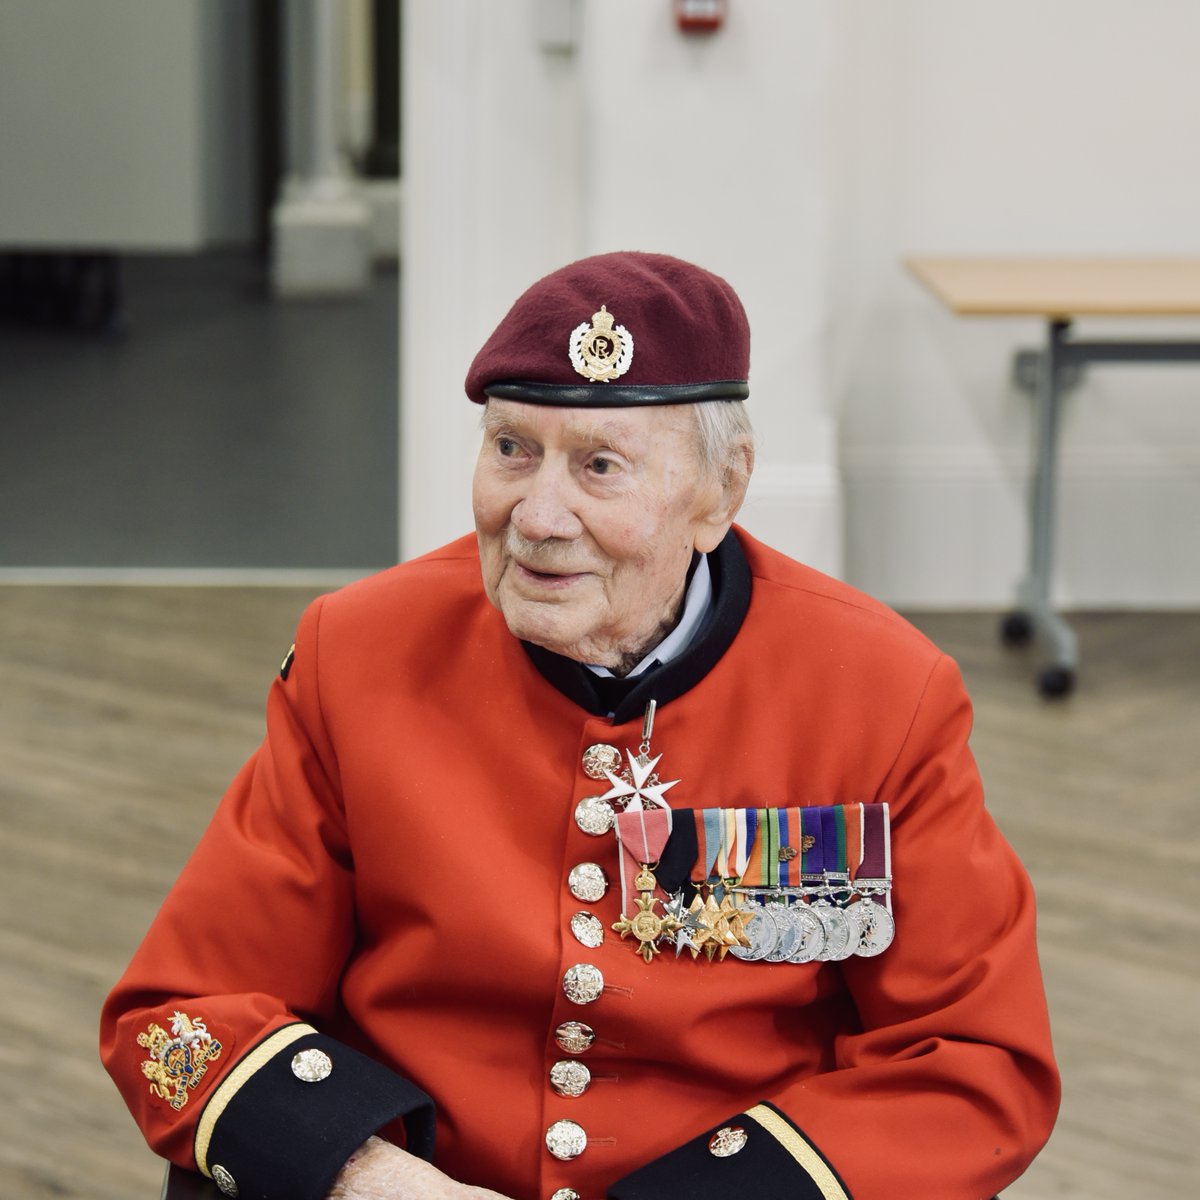 We share the sad news of Mr John Humphries' passing on Sunday, at the age of 102. Our condolences to his family and friends. A true legend! This photo was taken during his recent visit to our @REMuseum for his 102nd birthday. #SapperFamily #Ubique